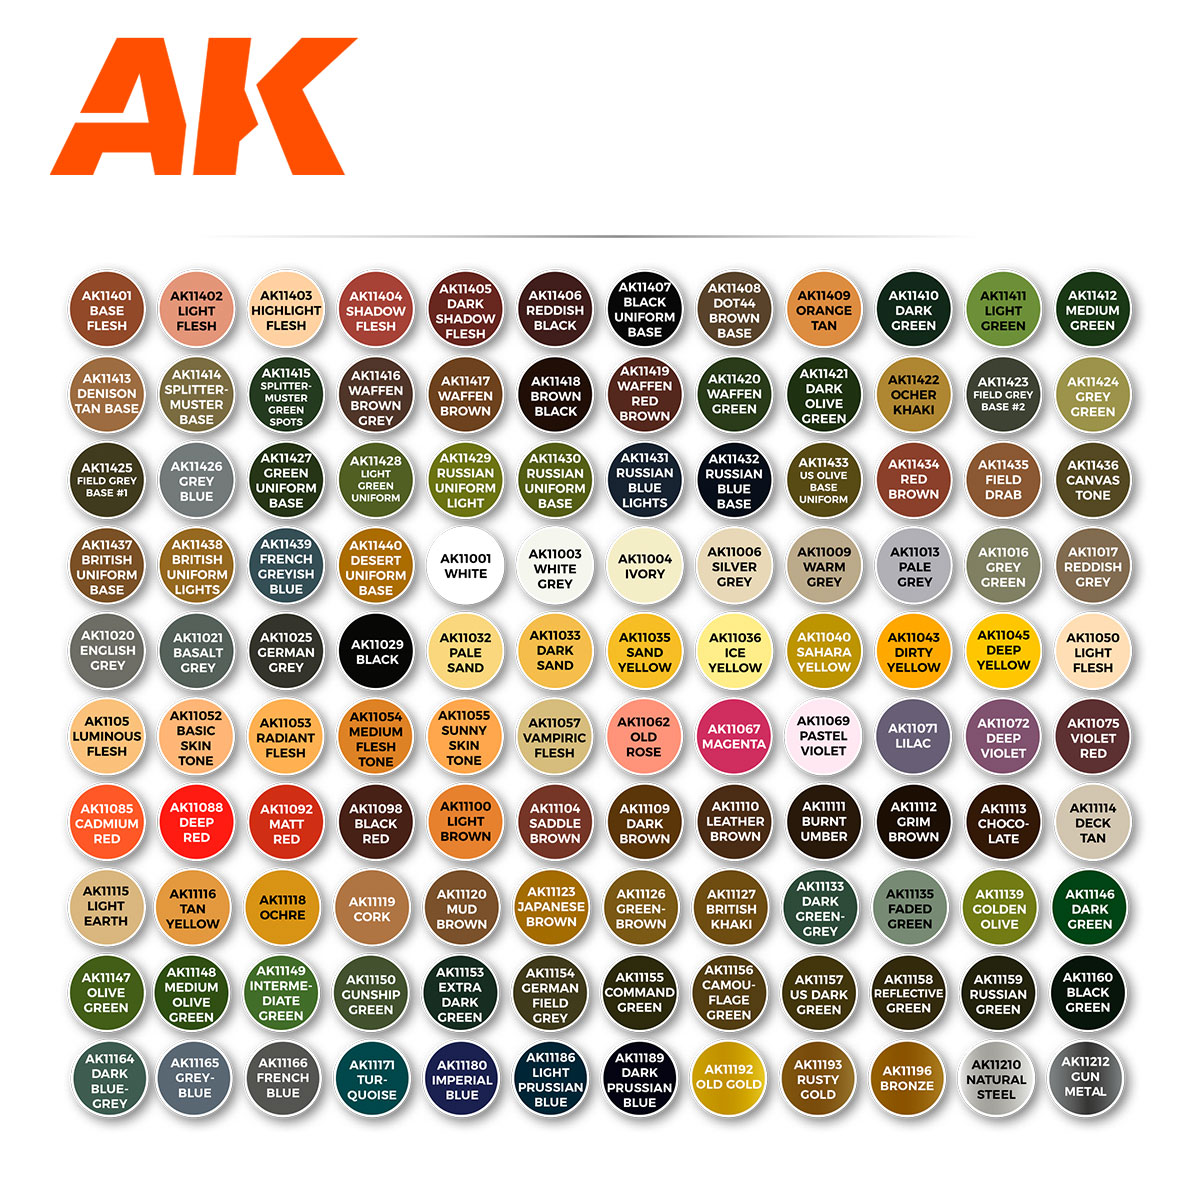 AK Interactive 3rd Generation Full Racks and Paint sets all in store! 